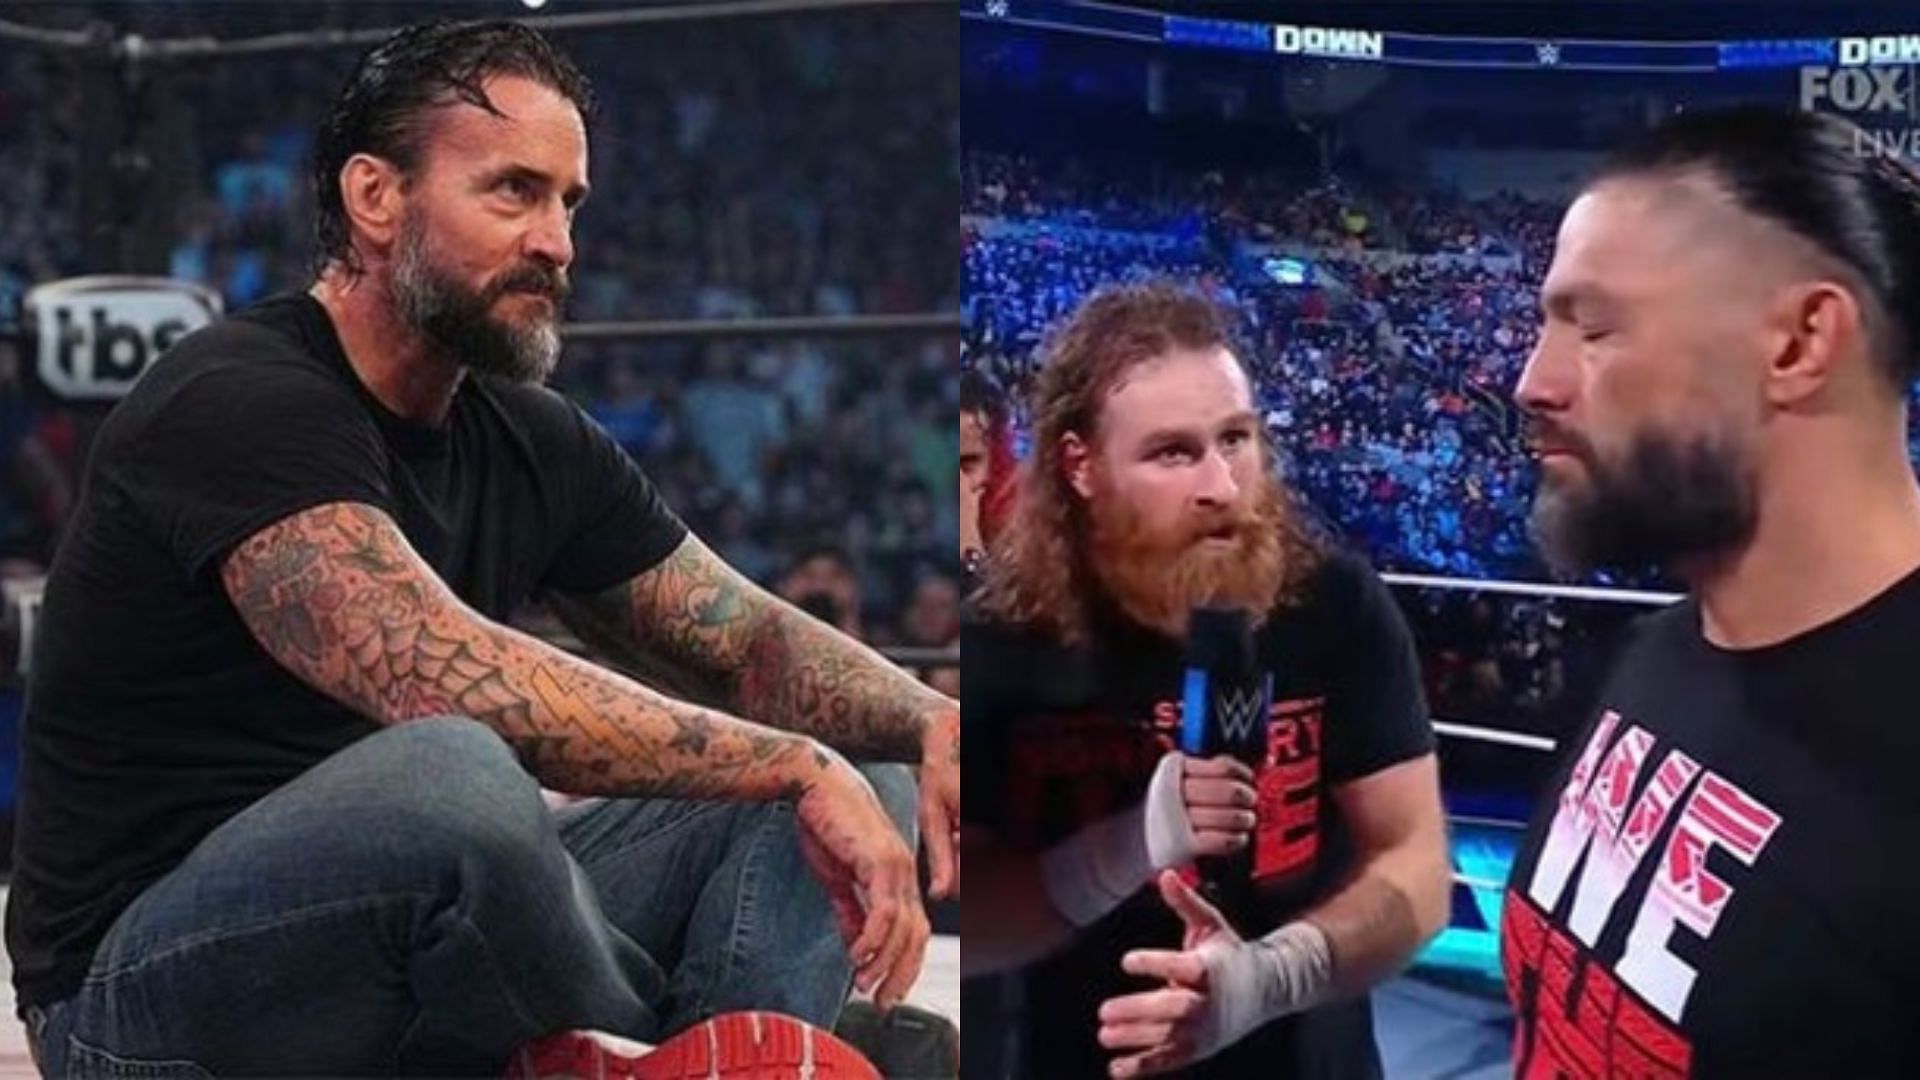 Fans were quick to predict that CM Punk would face Roman Reigns and Sami Zayn